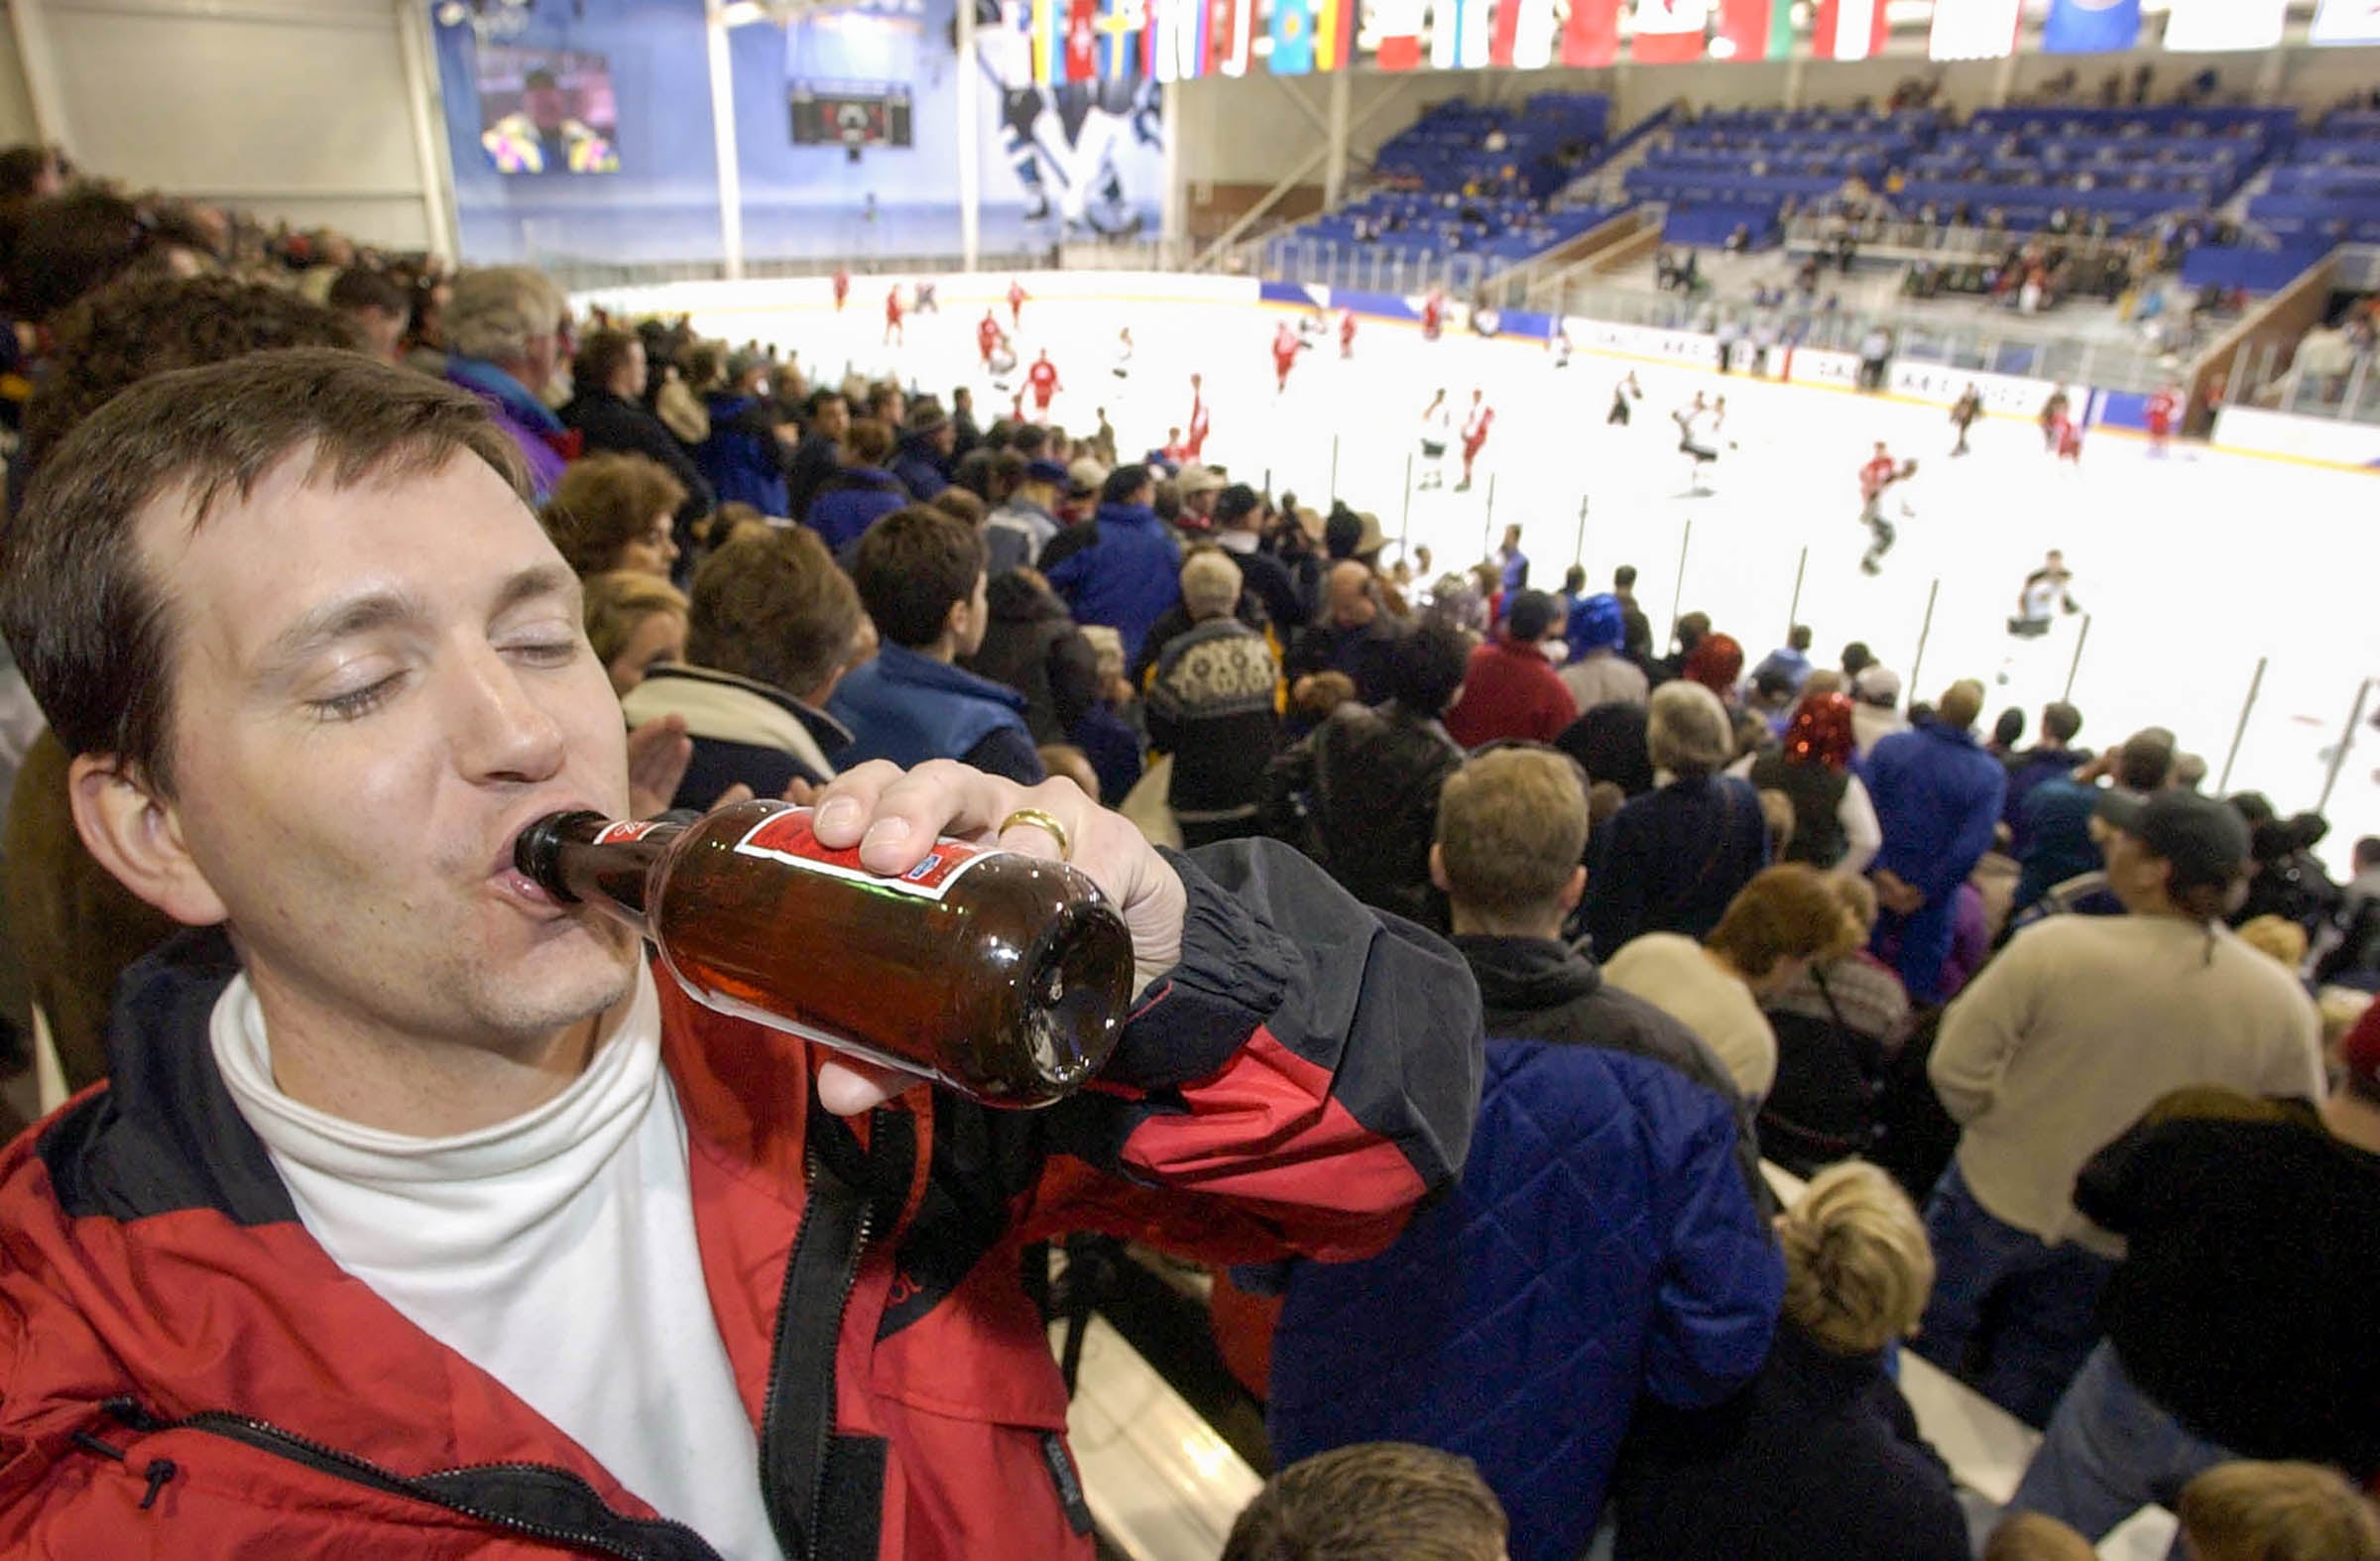 (Ryan Galbraith | The Salt Lake Tribune) Pete Wilson from Summit, N.J., takes a swig from his beer Sunday, Feb. 10, 2002, at Peaks Ice Arena in Provo as Austria and Germany compete in men’s hockey in the 2002 Winter Olympics. Today was the first time beer was for sale on a Sunday in Provo. “It's not a real beer though,” said Wilson, referring to Utah's 3.2% alcohol content.